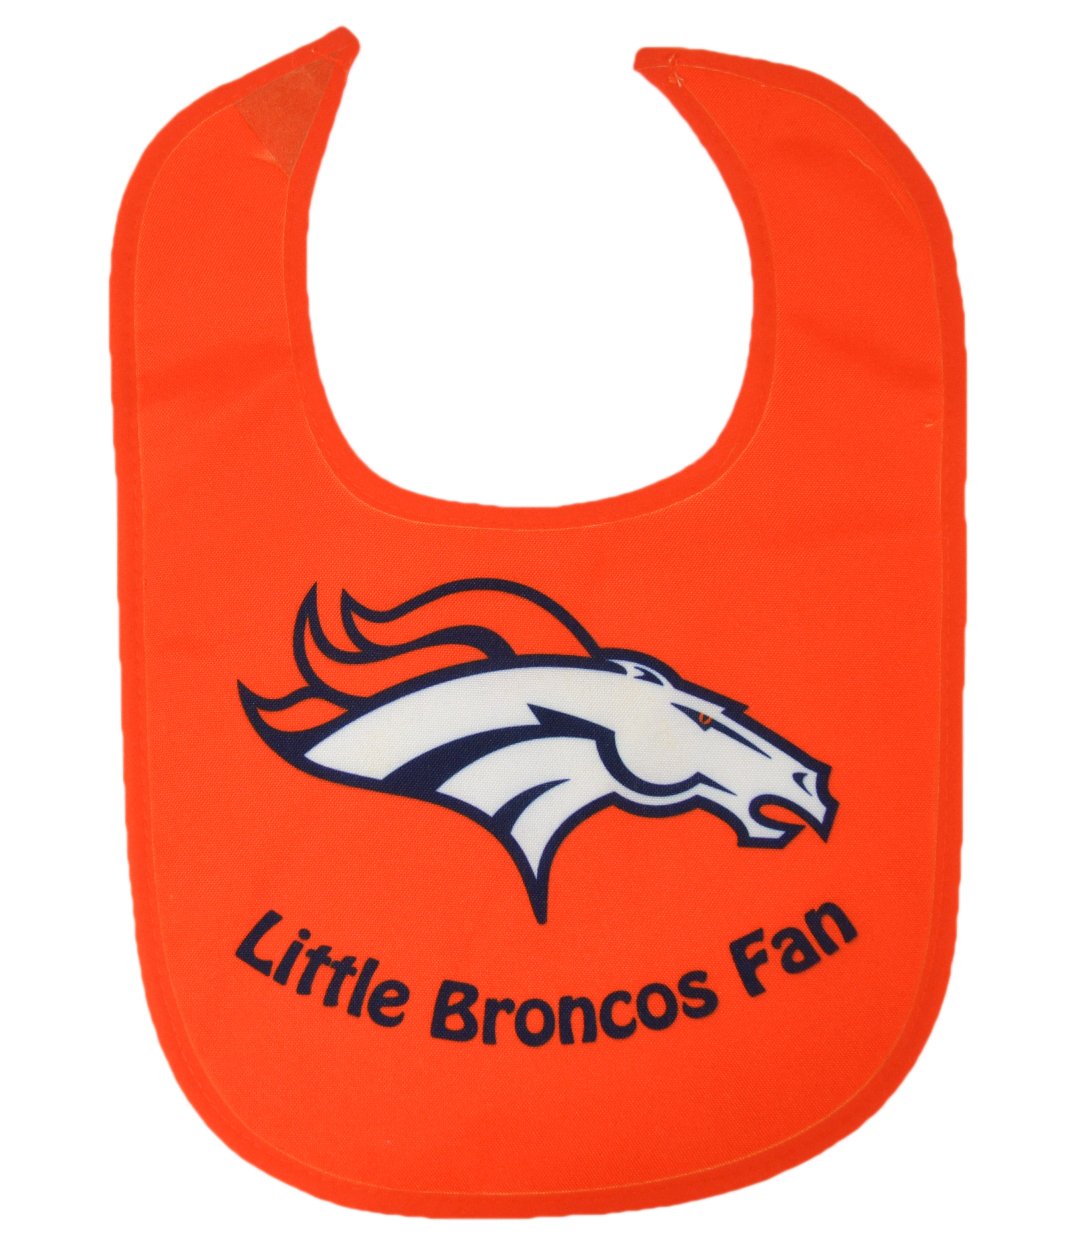 Official NFL Fan Shop Authentic Baby Pacifier and Bib Bundle Set. Start Out Early in Joining The Fan Club and Show Support for Your Favorite Football Team